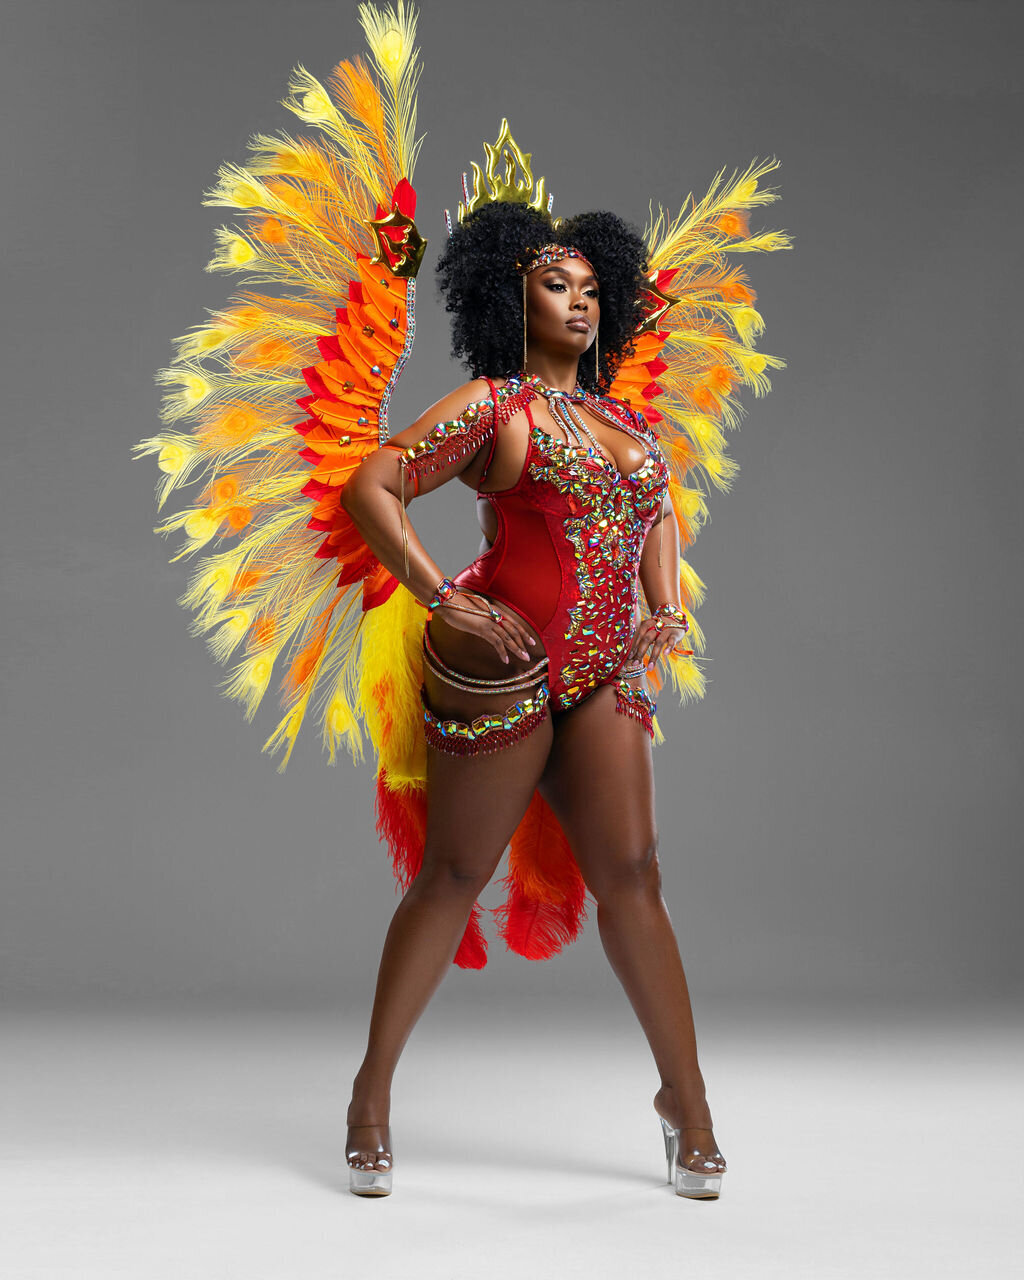 Red and Yellow costume for Caribana Toronto. Register to play mas with Sunlime Mas